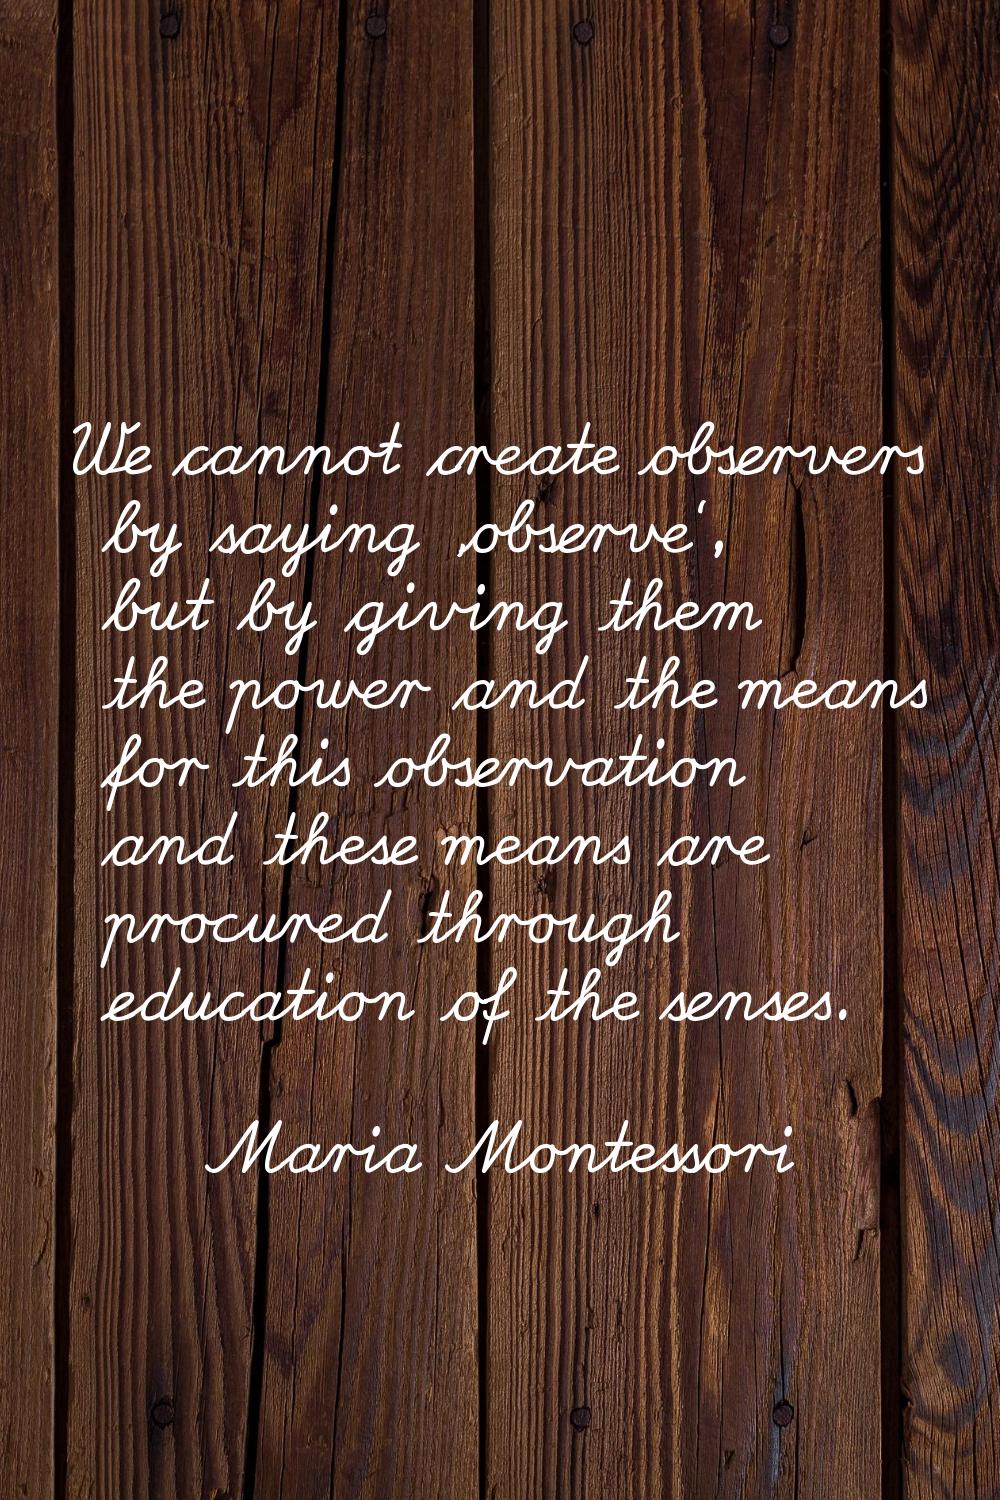 We cannot create observers by saying 'observe', but by giving them the power and the means for this